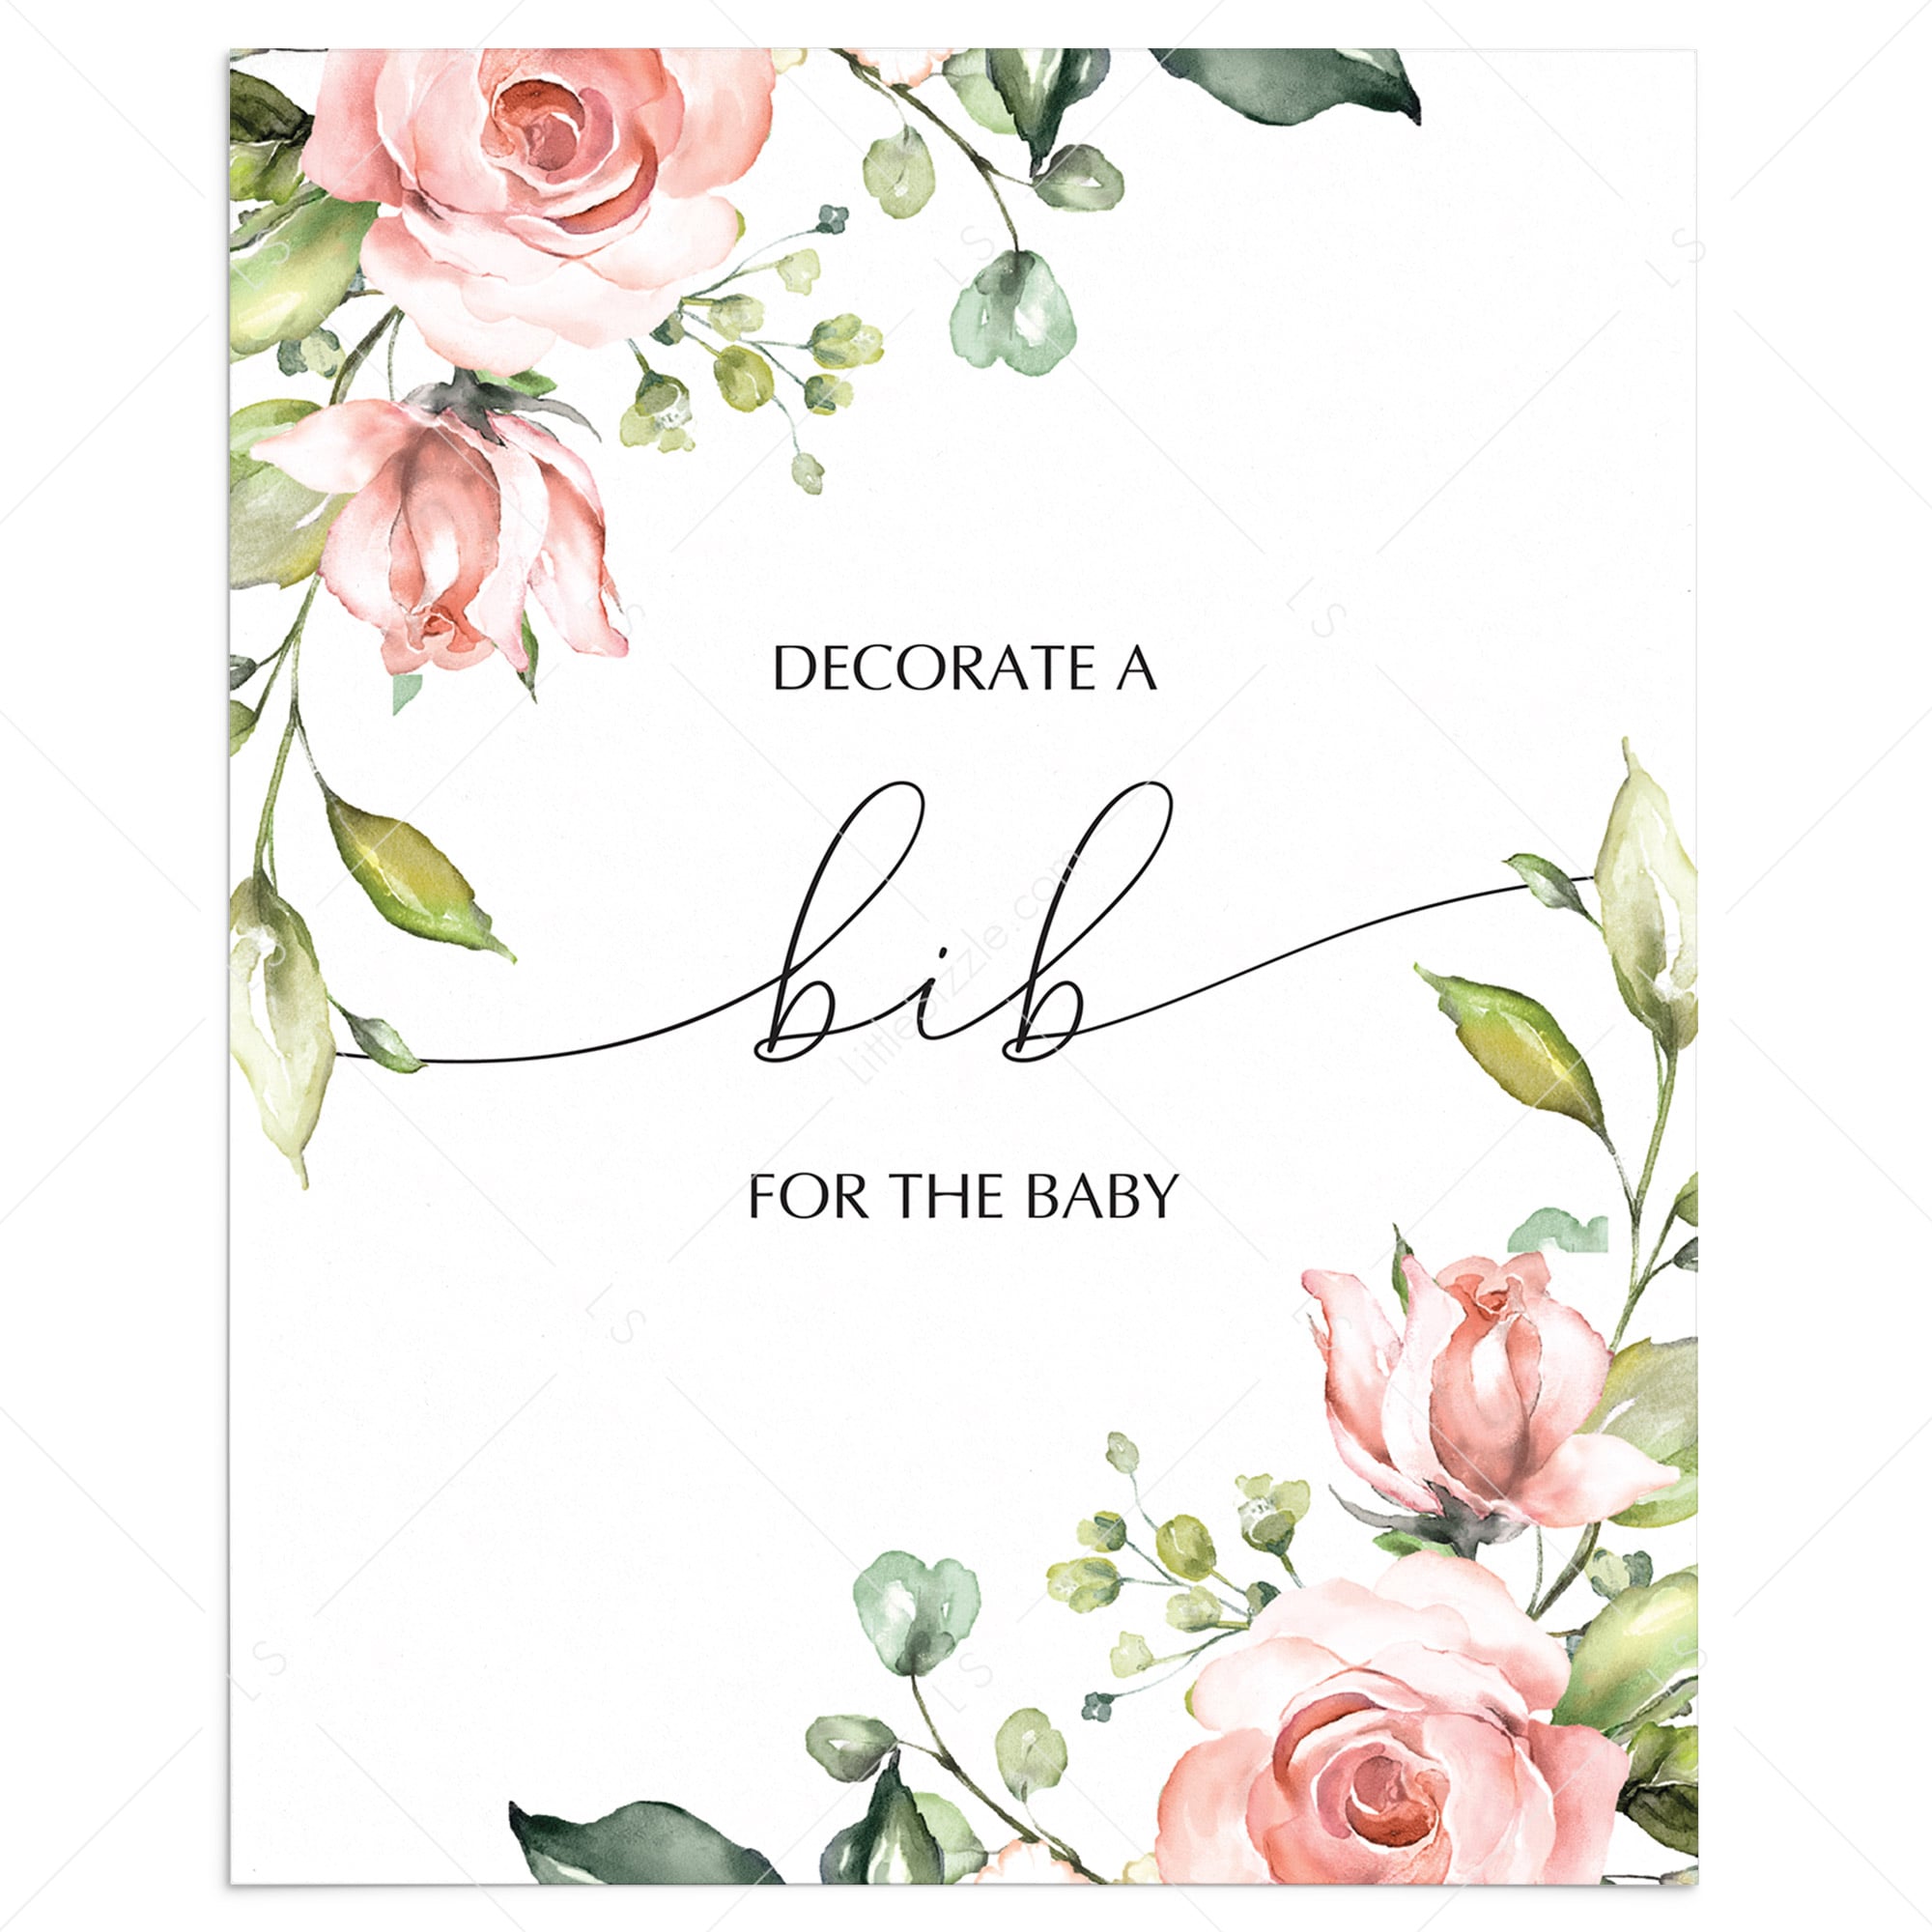 Floral baby shower mingling game decorate a bib station by LittleSizzle